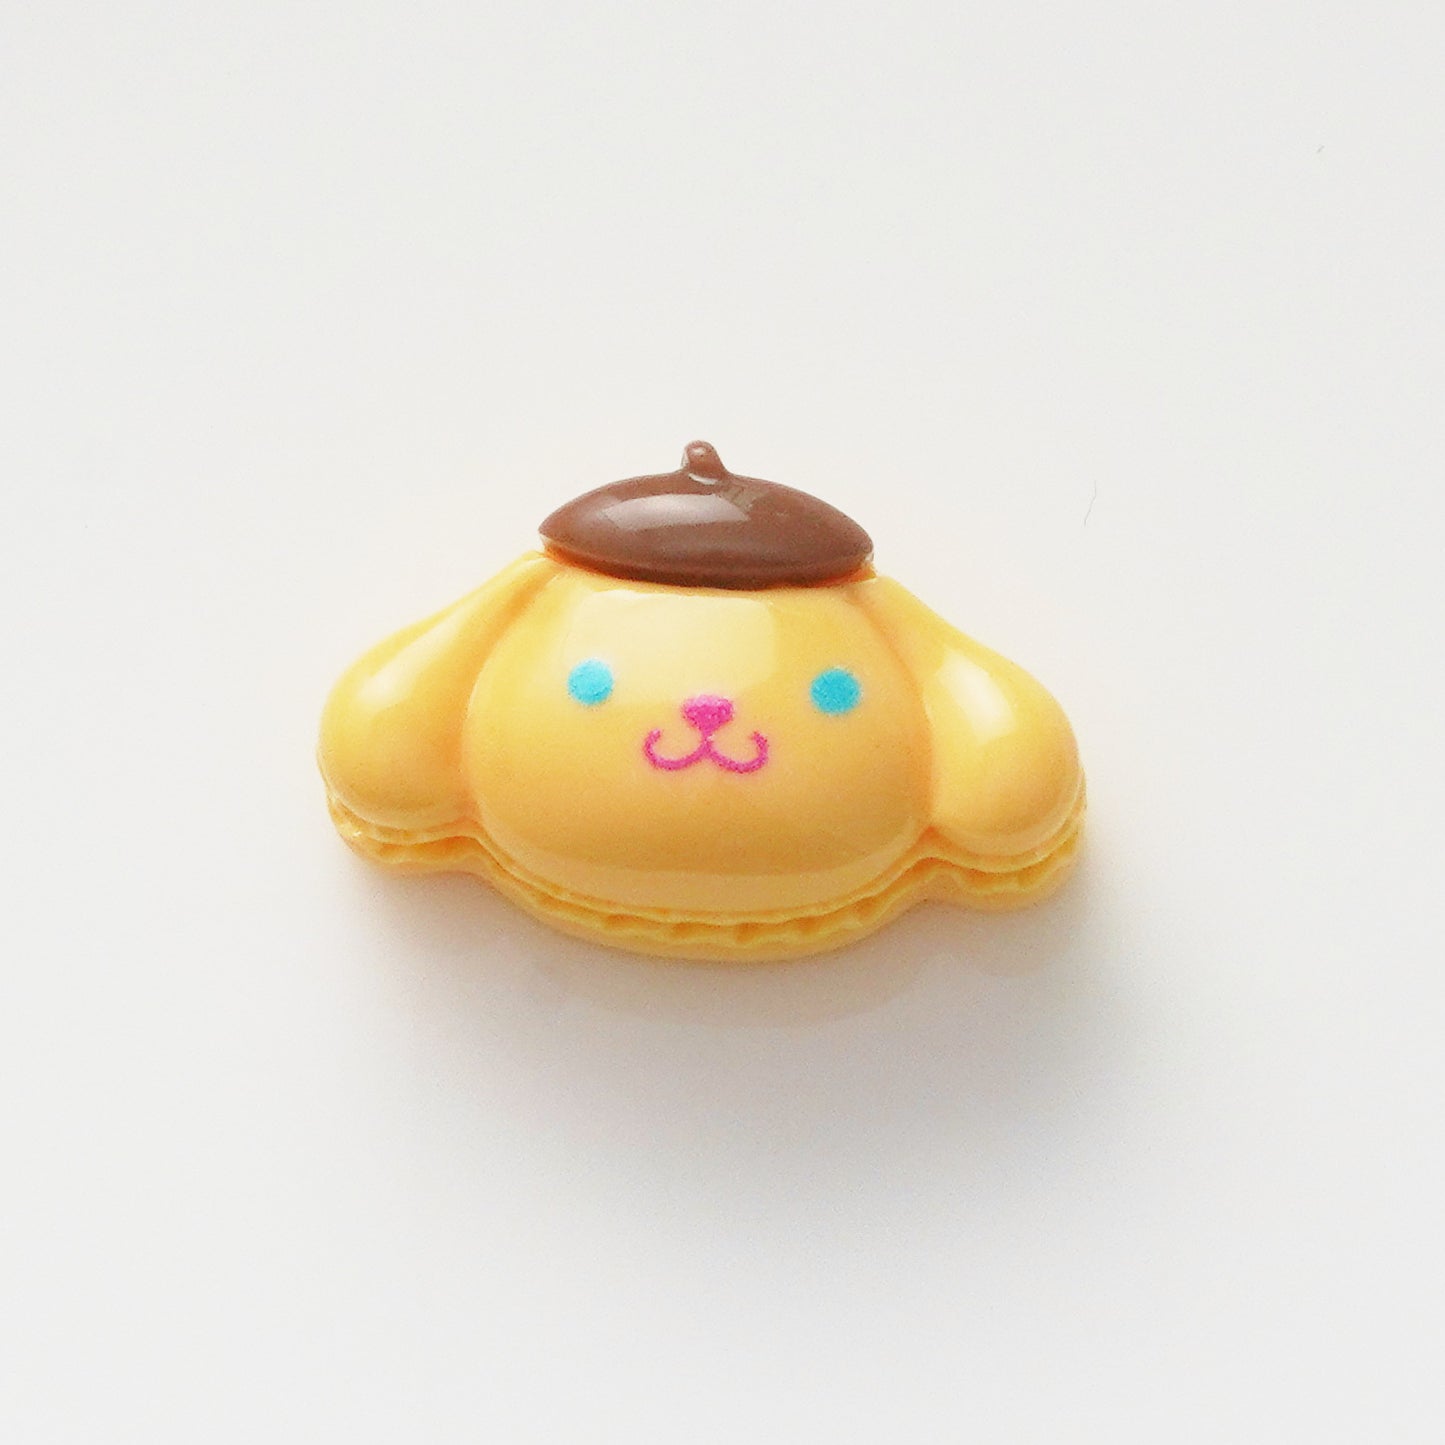 10 PCS Sanrio Resin Charms for DIY Crafts